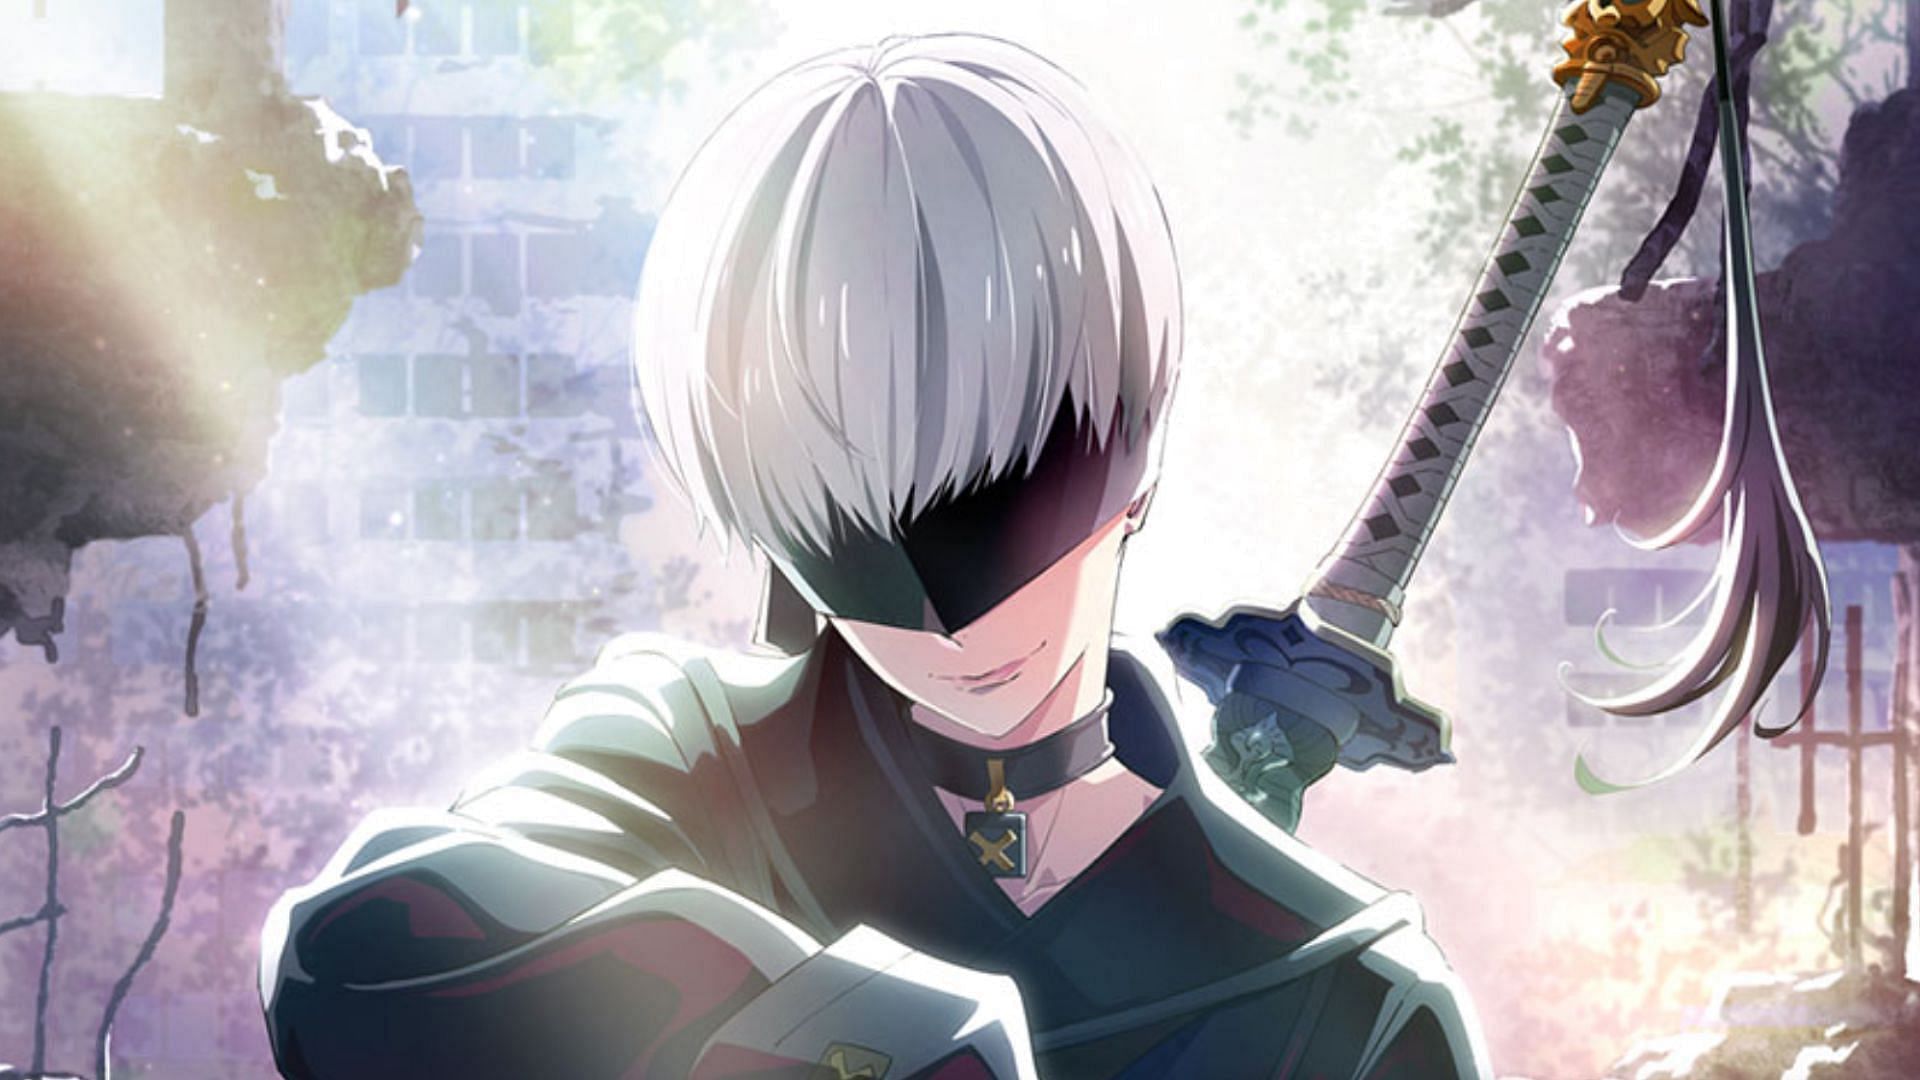 9S as seen in promotional artwork for the anime series (Image via A-1 Pictures)